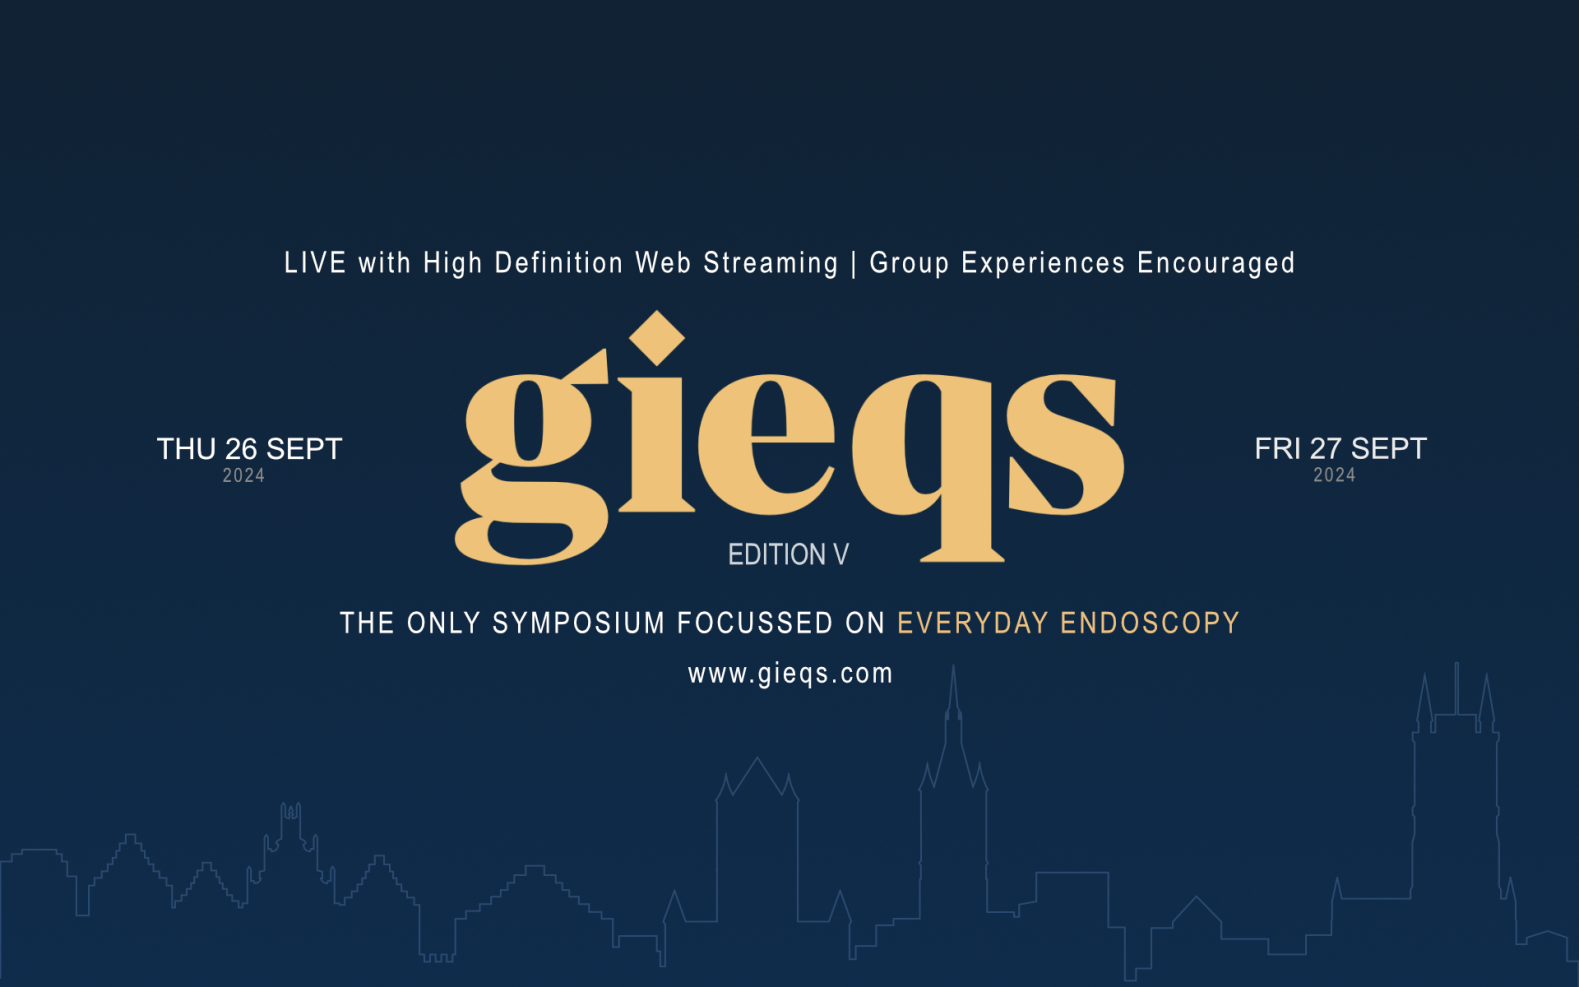 Flyer for the fifth edition of the GIEQs symposium